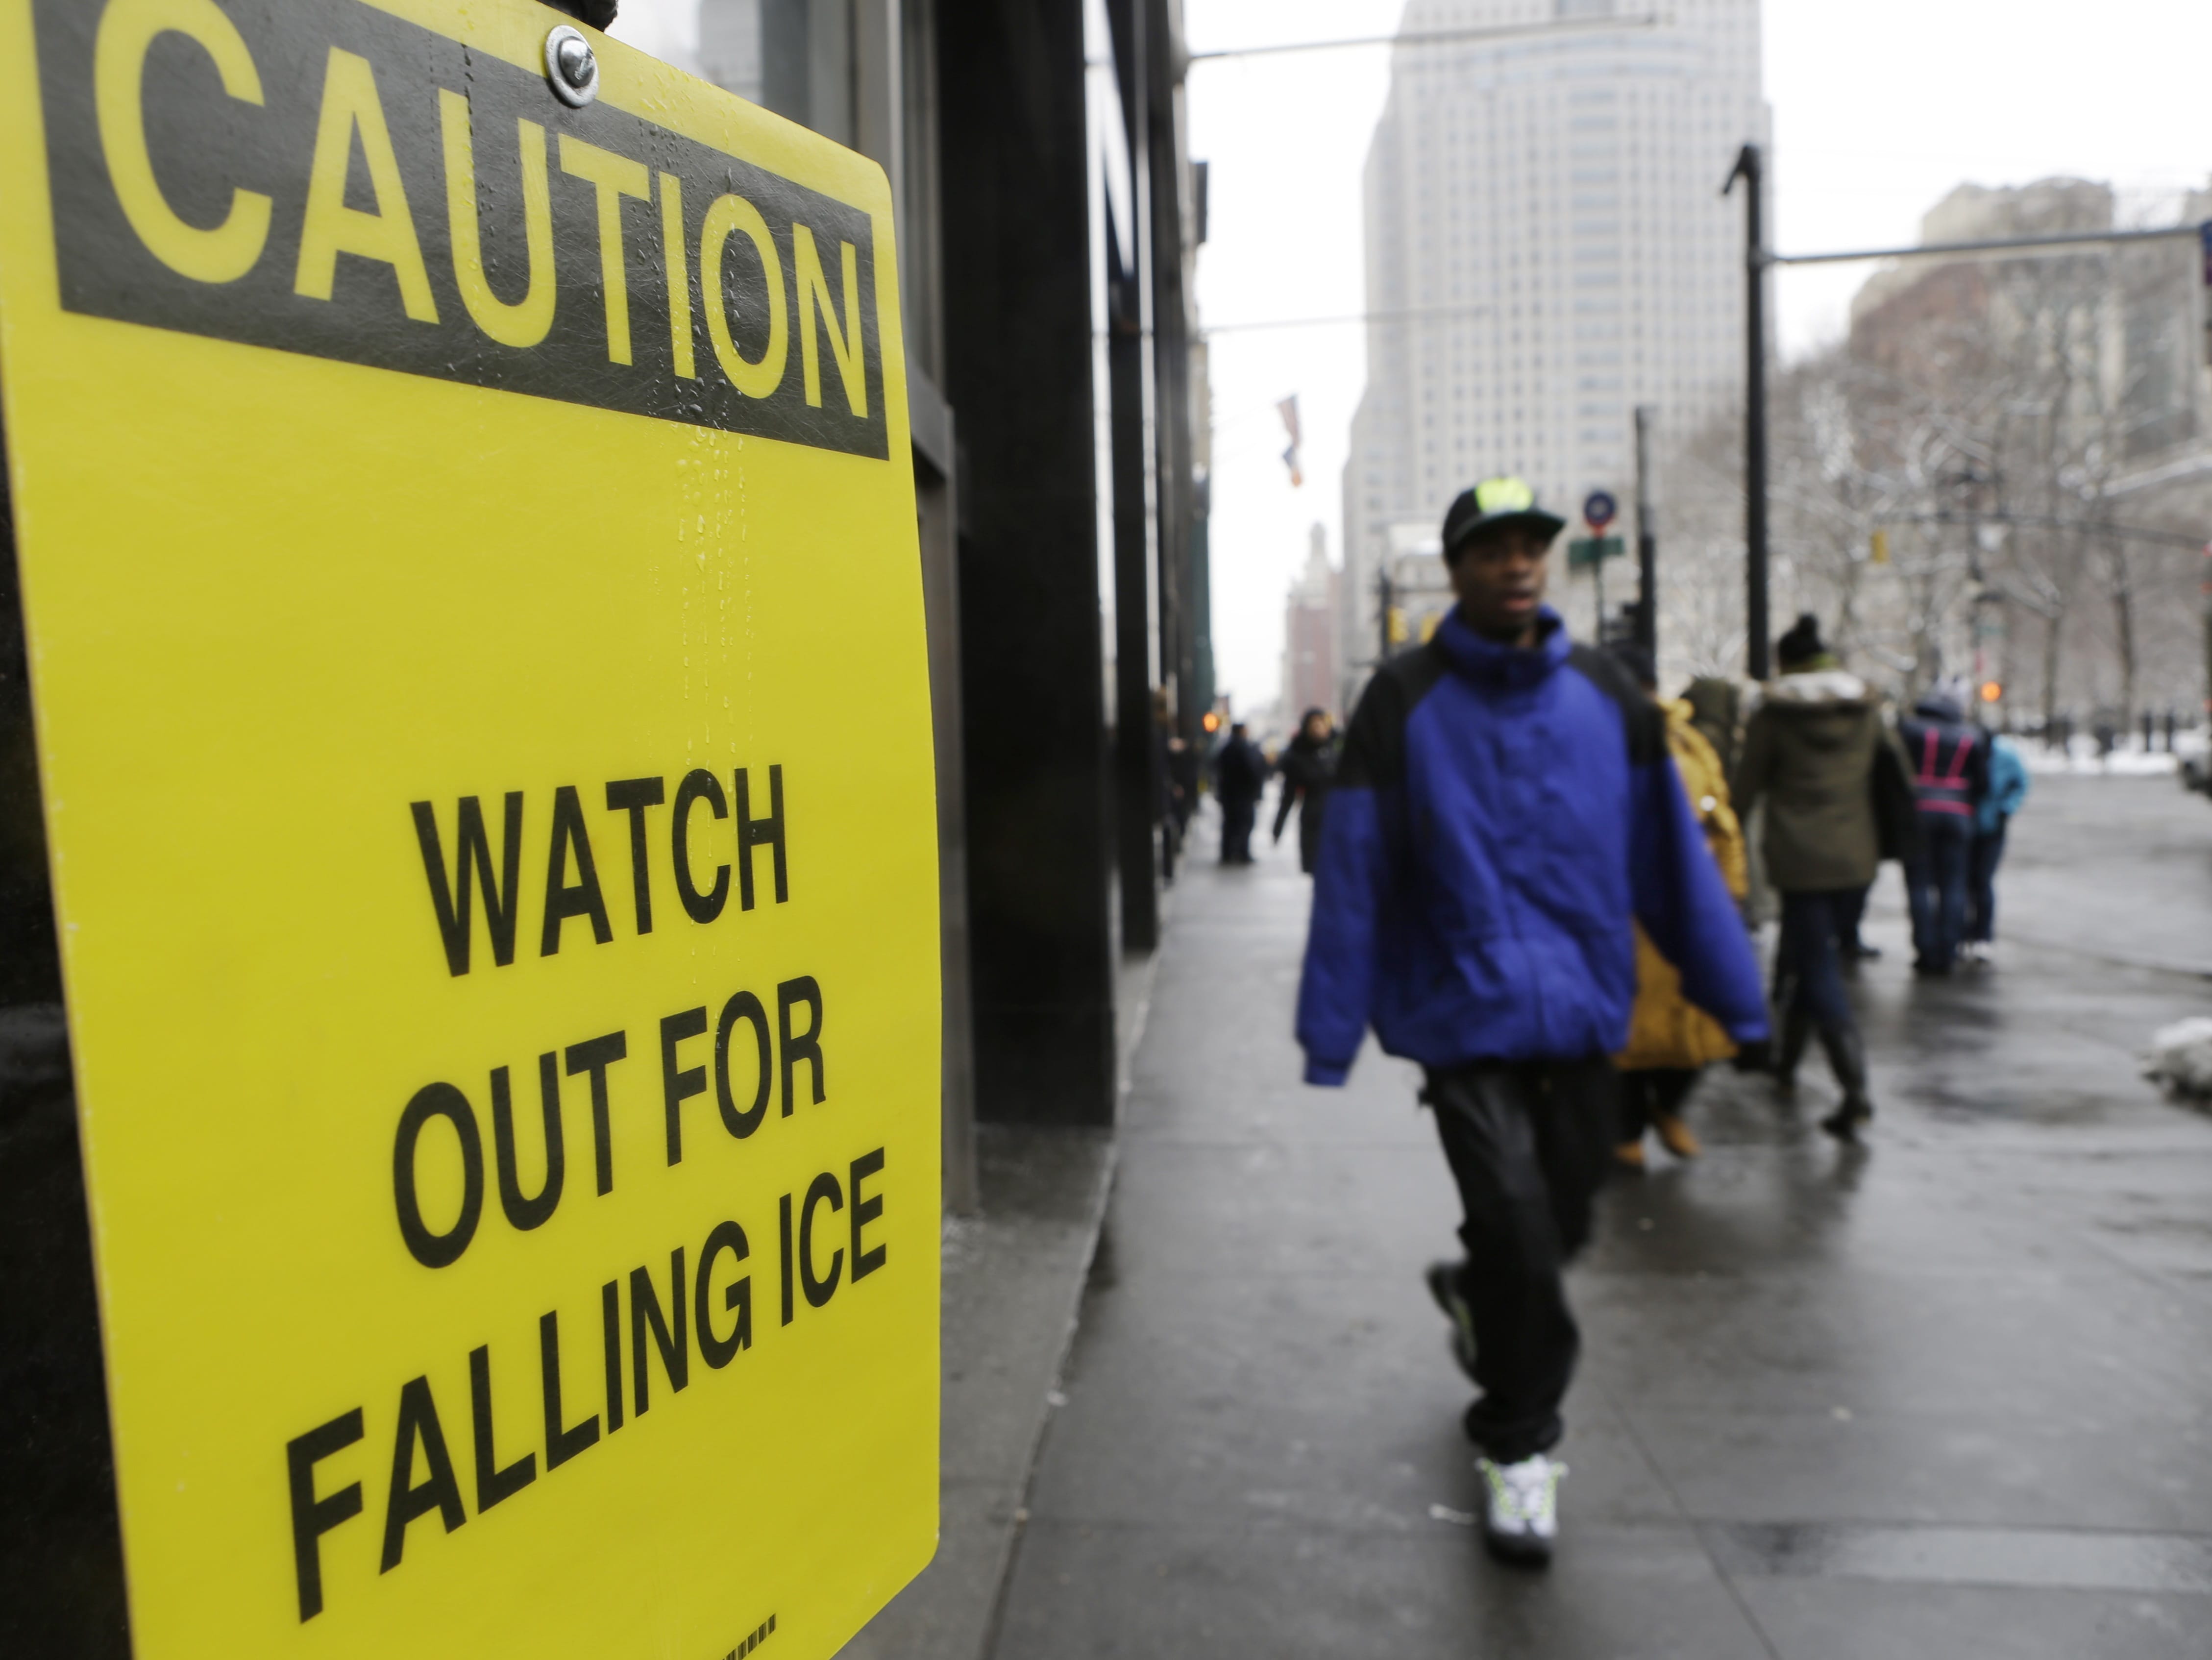 Pedestrians pass a sign warning them of falling ice near City Hall Tuesday in New York.